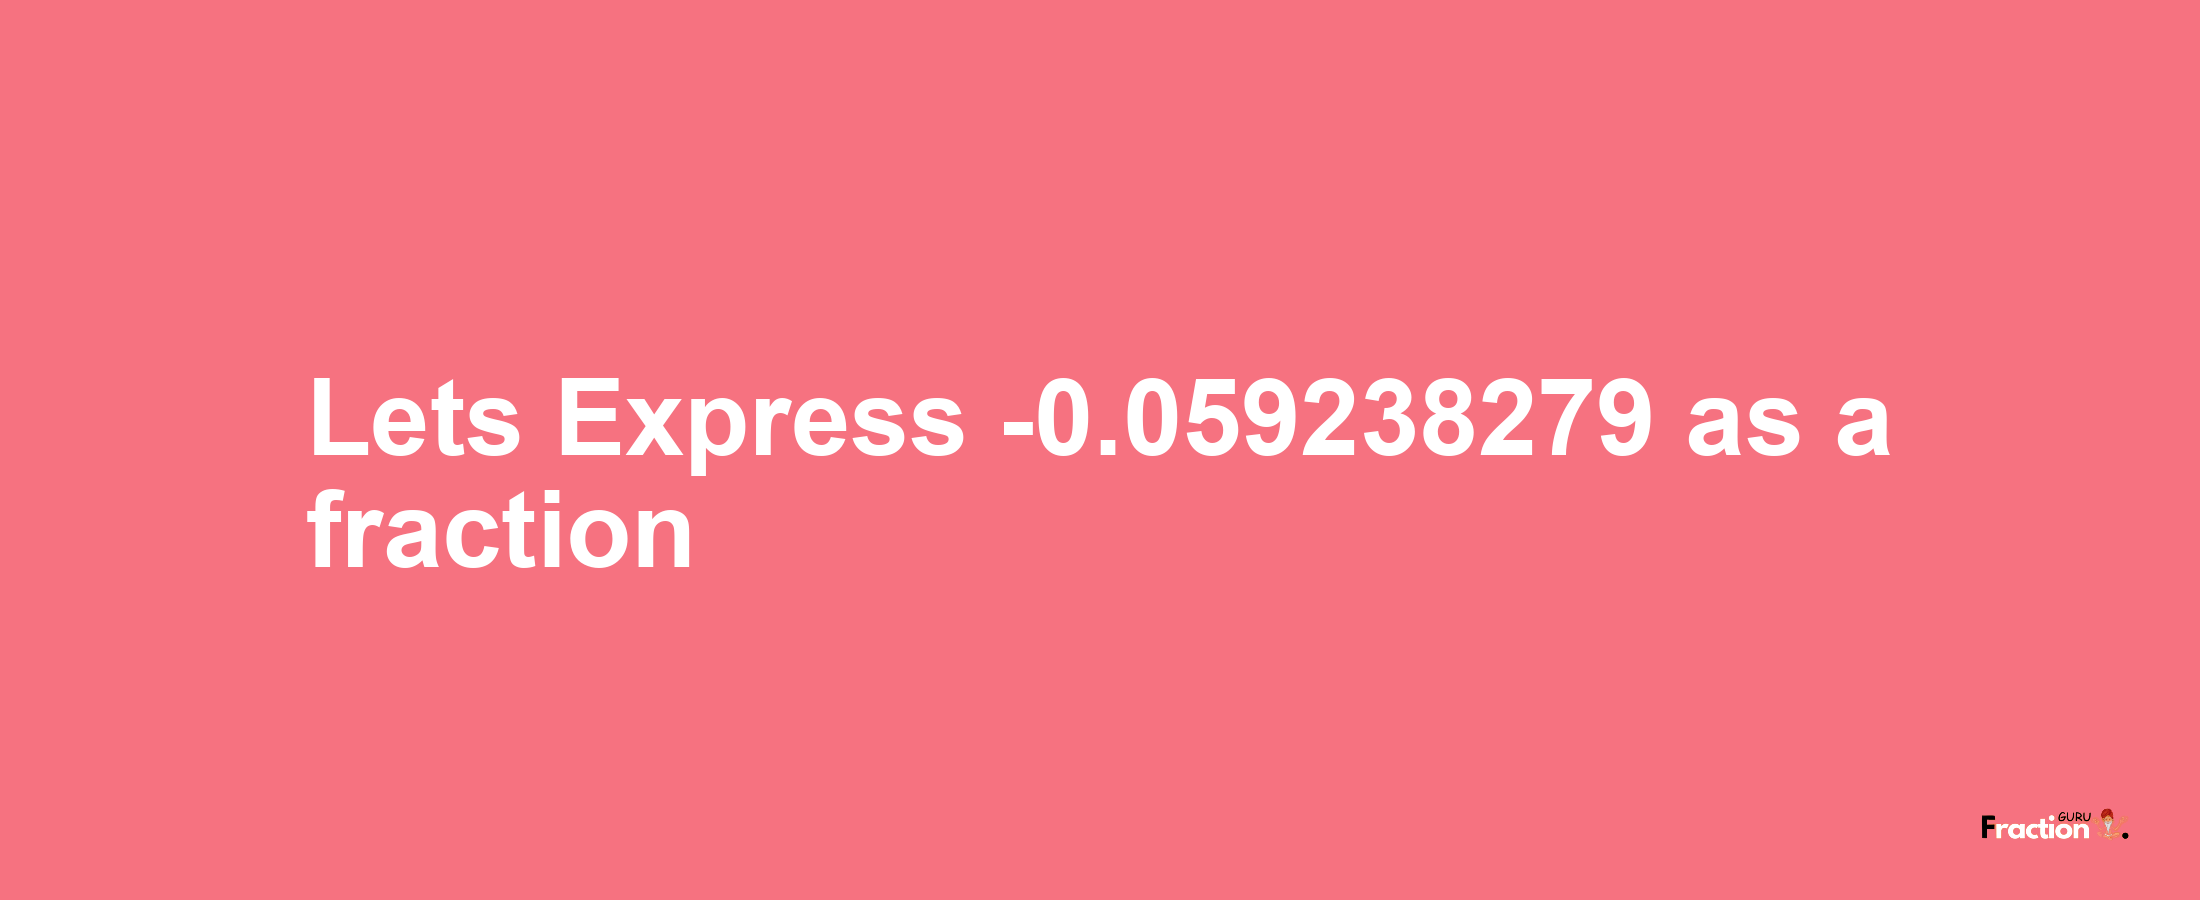 Lets Express -0.059238279 as afraction